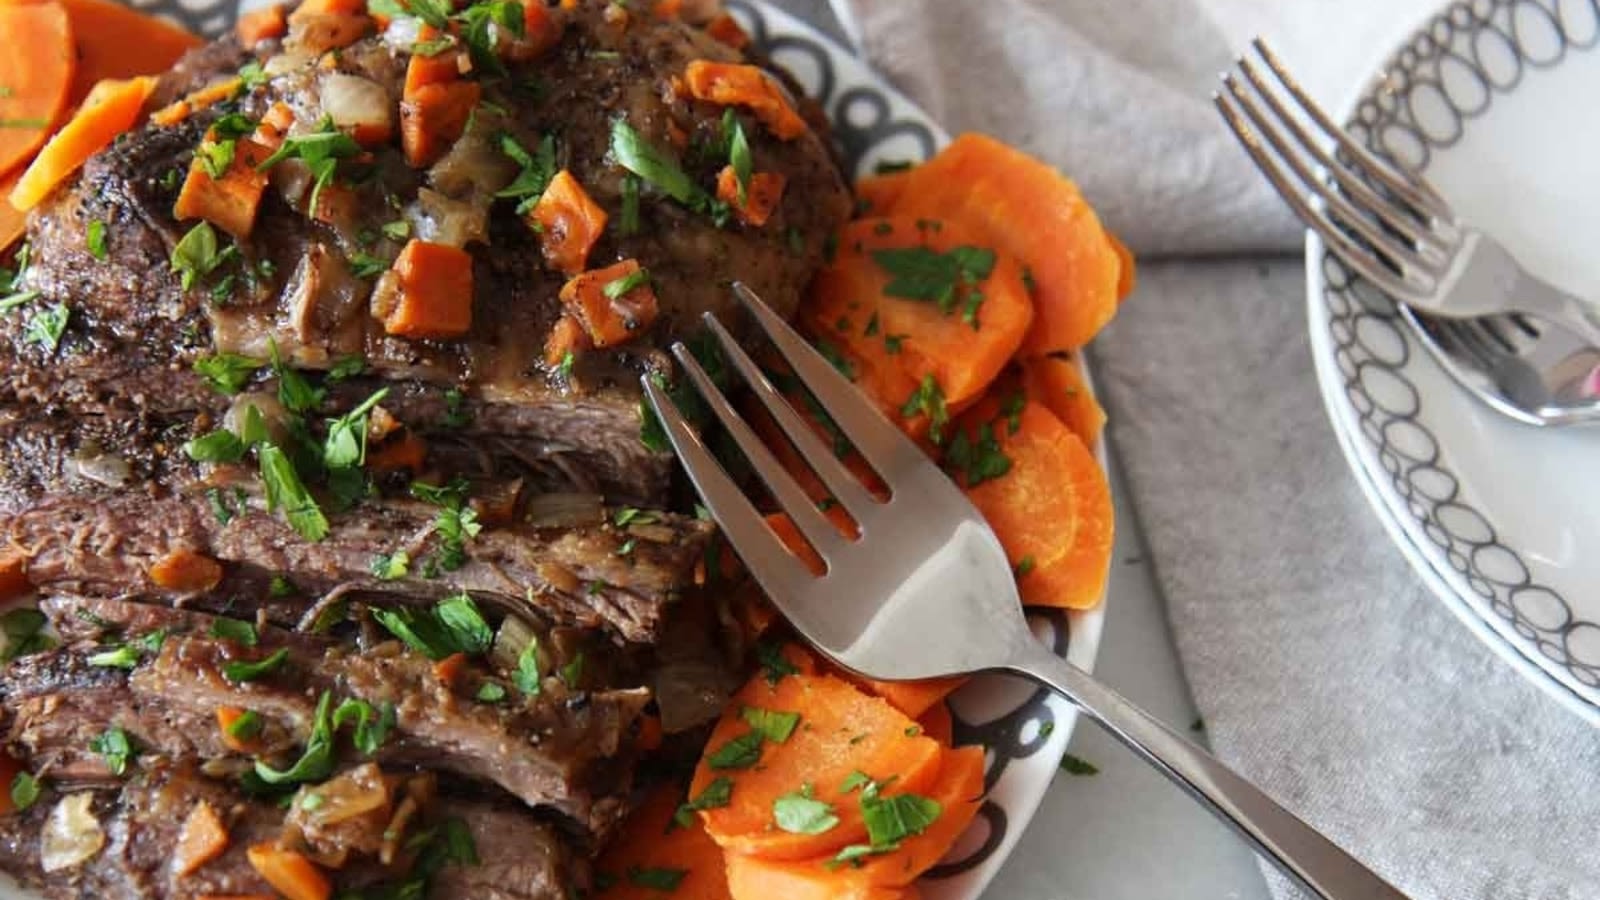 5-ingredient make-ahead Passover recipes: Brisket, flourless chocolate cake and more